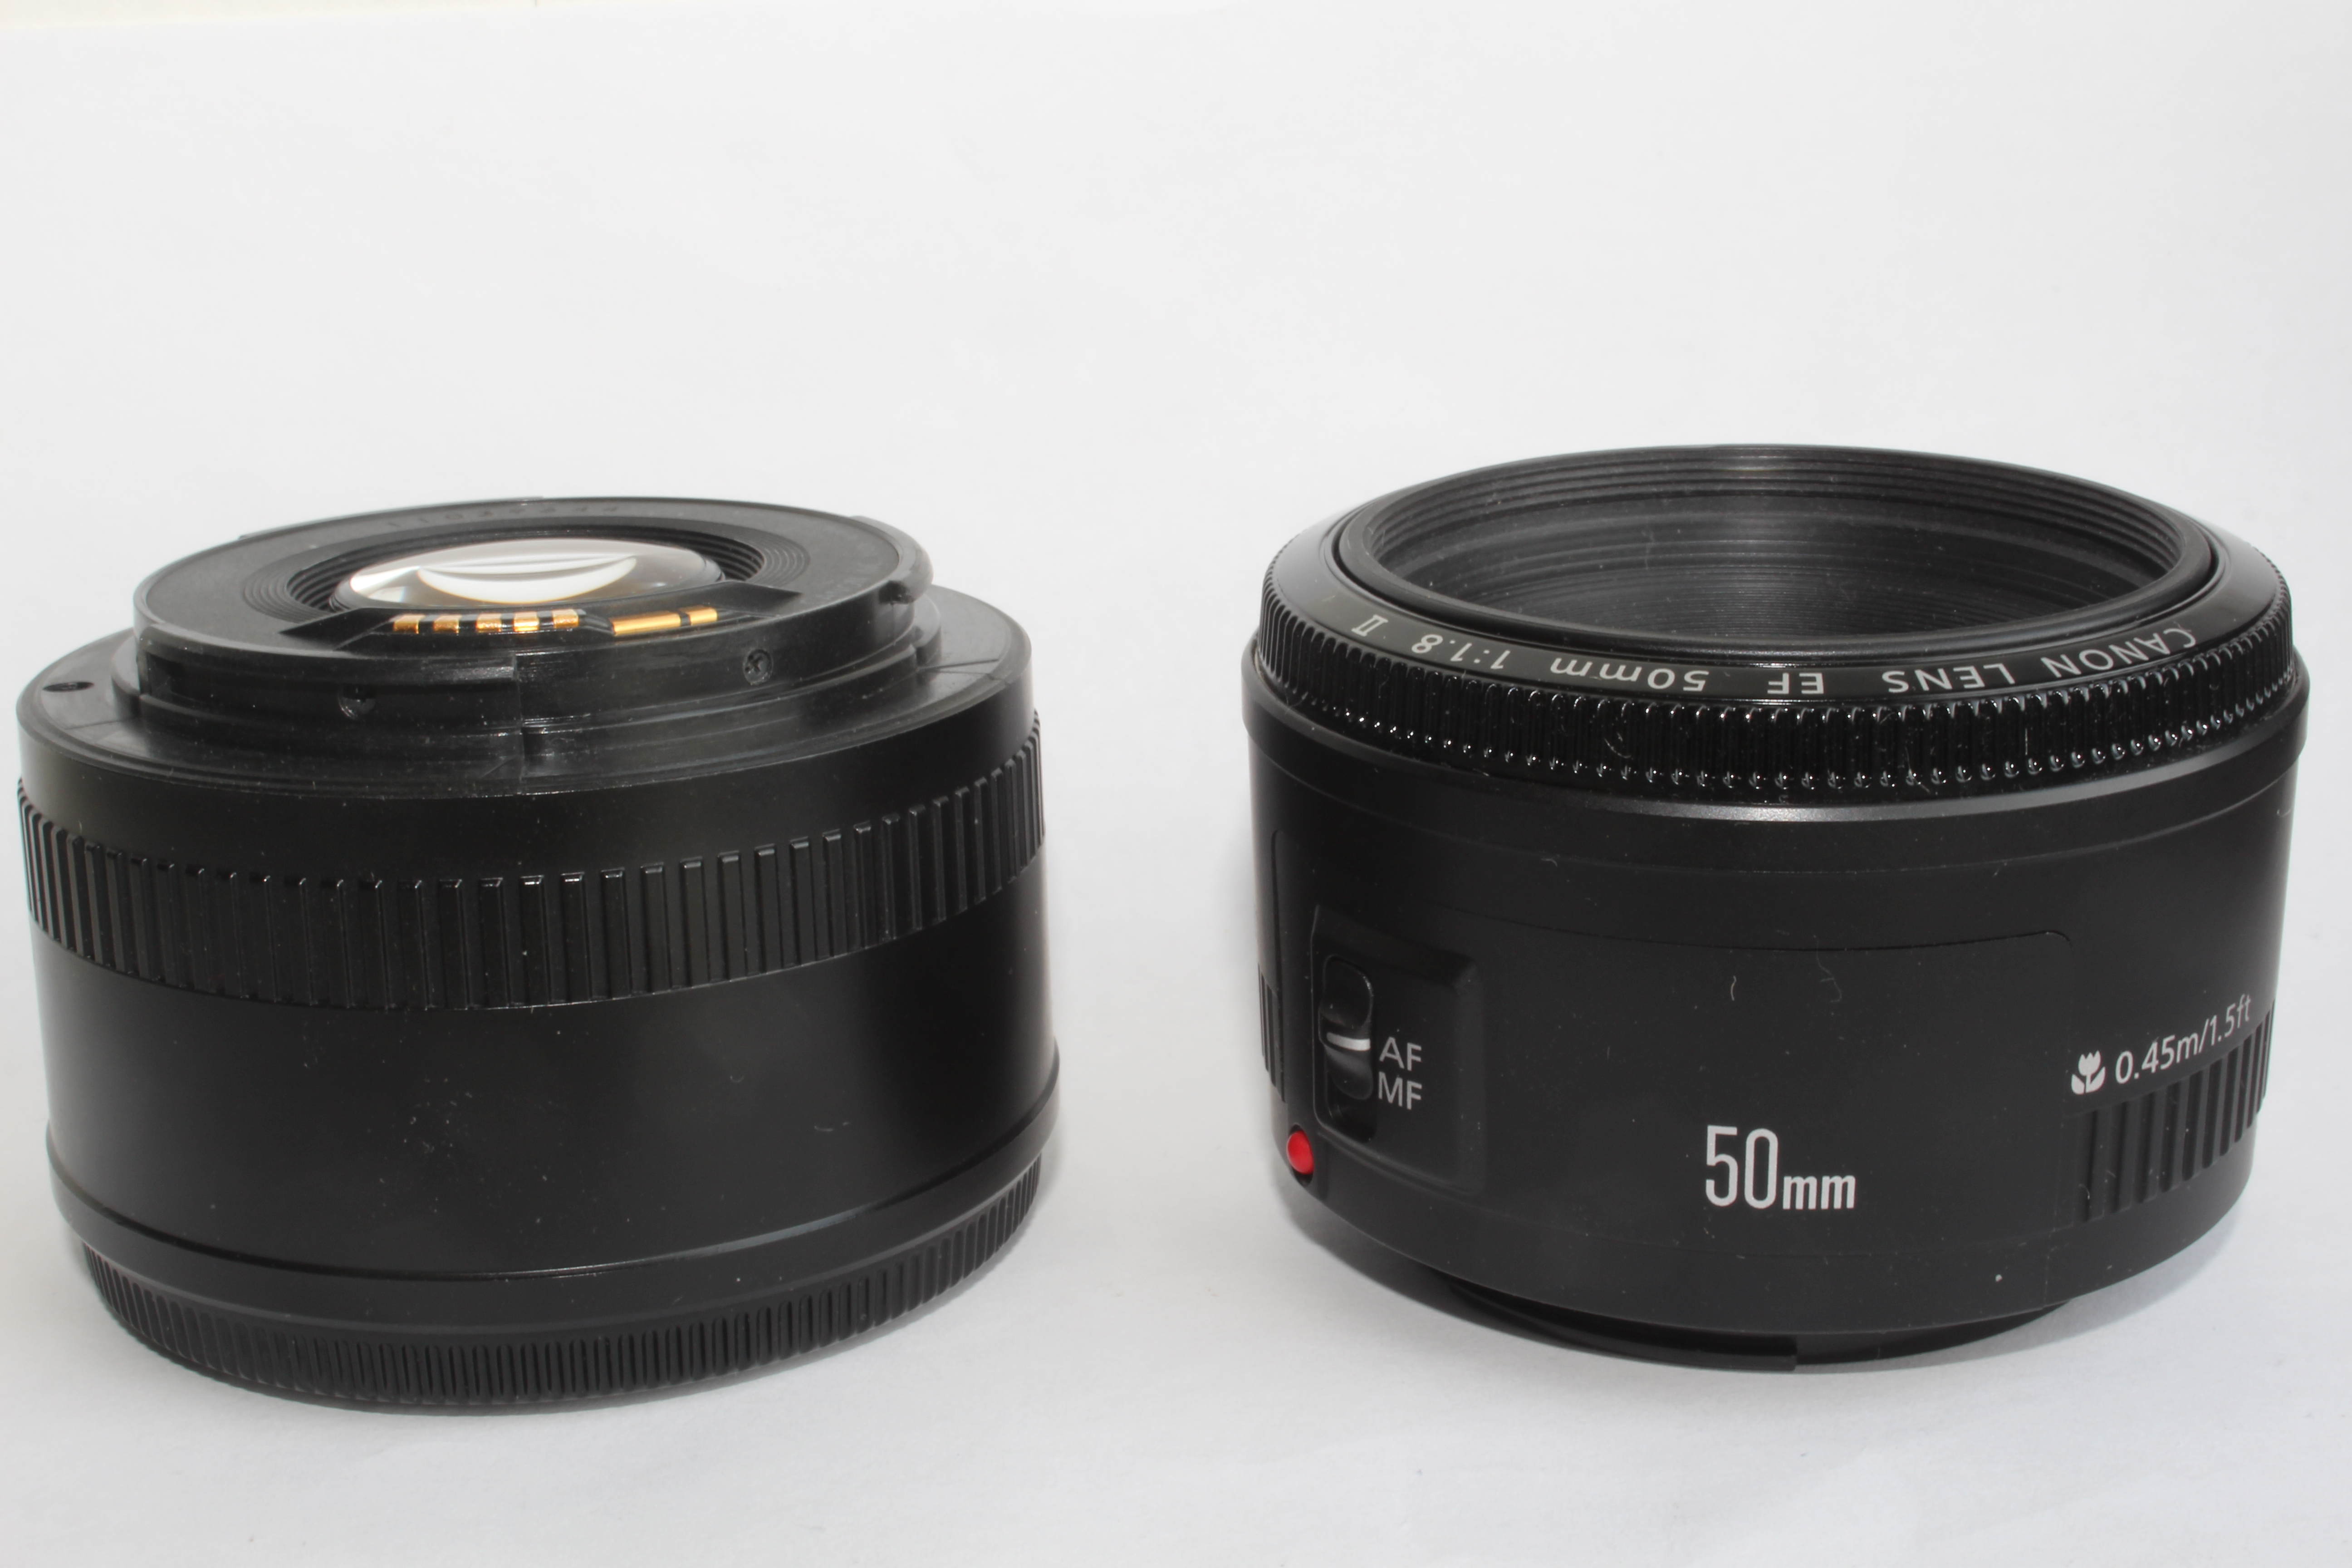 Canon EF 50mm II lens front and rear side-by-side edit1.JPG. d:Special:Enti...